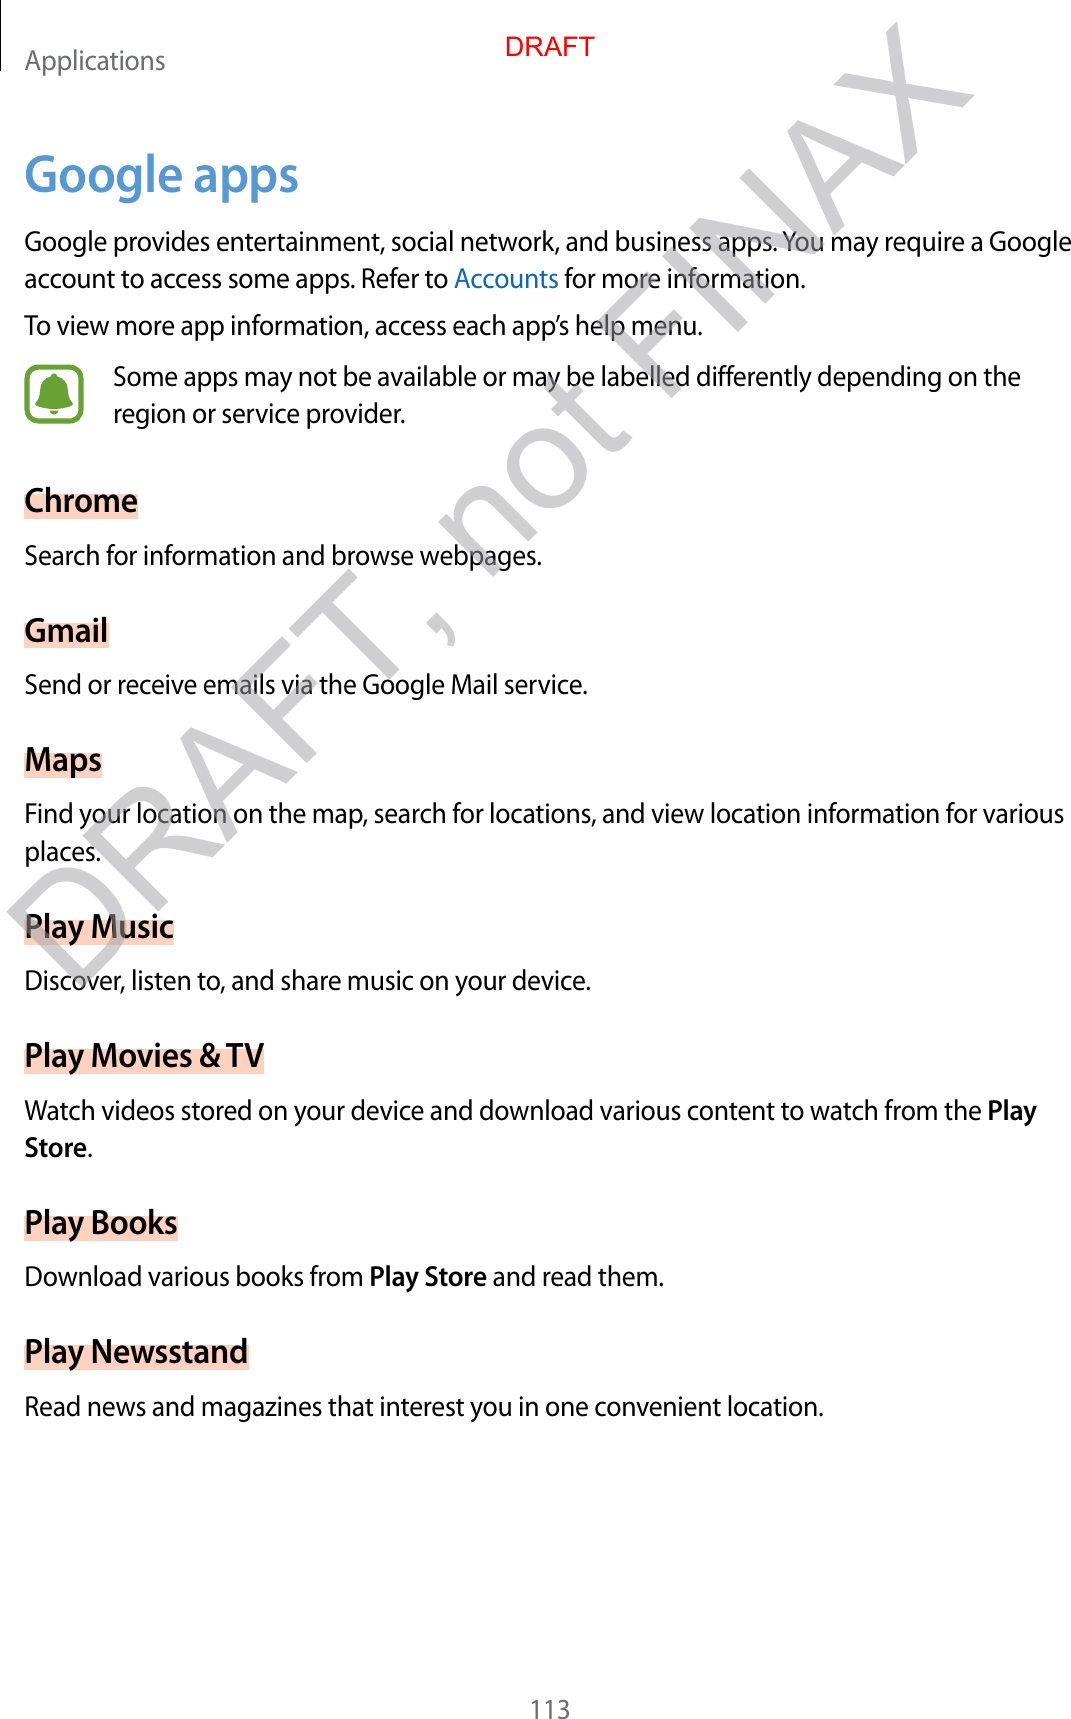 Applications113Google appsGoogle provides entertainment, social network, and business apps. You may require a Google account to access some apps. Refer to Accounts for more information.To view more app information, access each app’s help menu.Some apps may not be available or may be labelled differently depending on the region or service provider.ChromeSearch for information and browse webpages.GmailSend or receive emails via the Google Mail service.MapsFind your location on the map, search for locations, and view location information for various places.Play MusicDiscover, listen to, and share music on your device.Play Movies &amp; TVWatch videos stored on your device and download various content to watch from the Play Store.Play BooksDownload various books from Play Store and read them.Play NewsstandRead news and magazines that interest you in one convenient location.DRAFTDRAFT, not FINAX